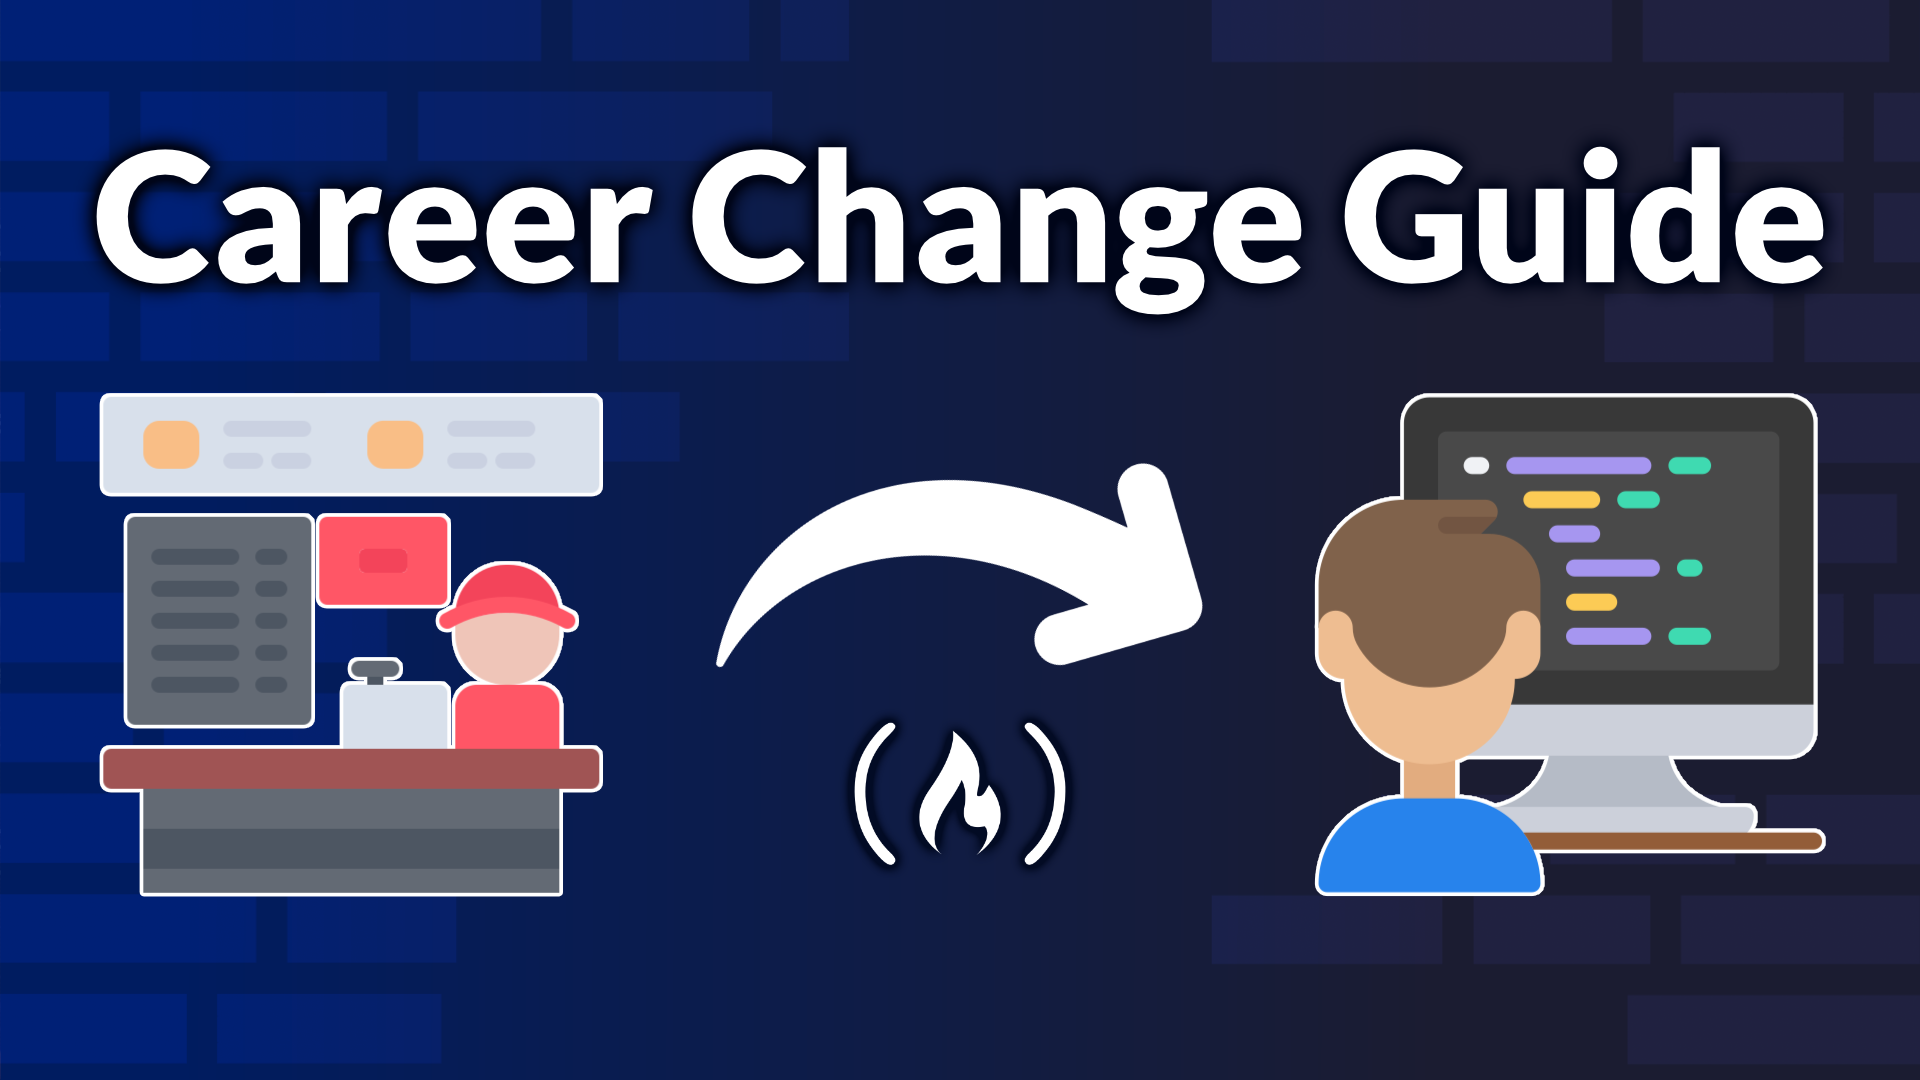 Career Change to Code Guide